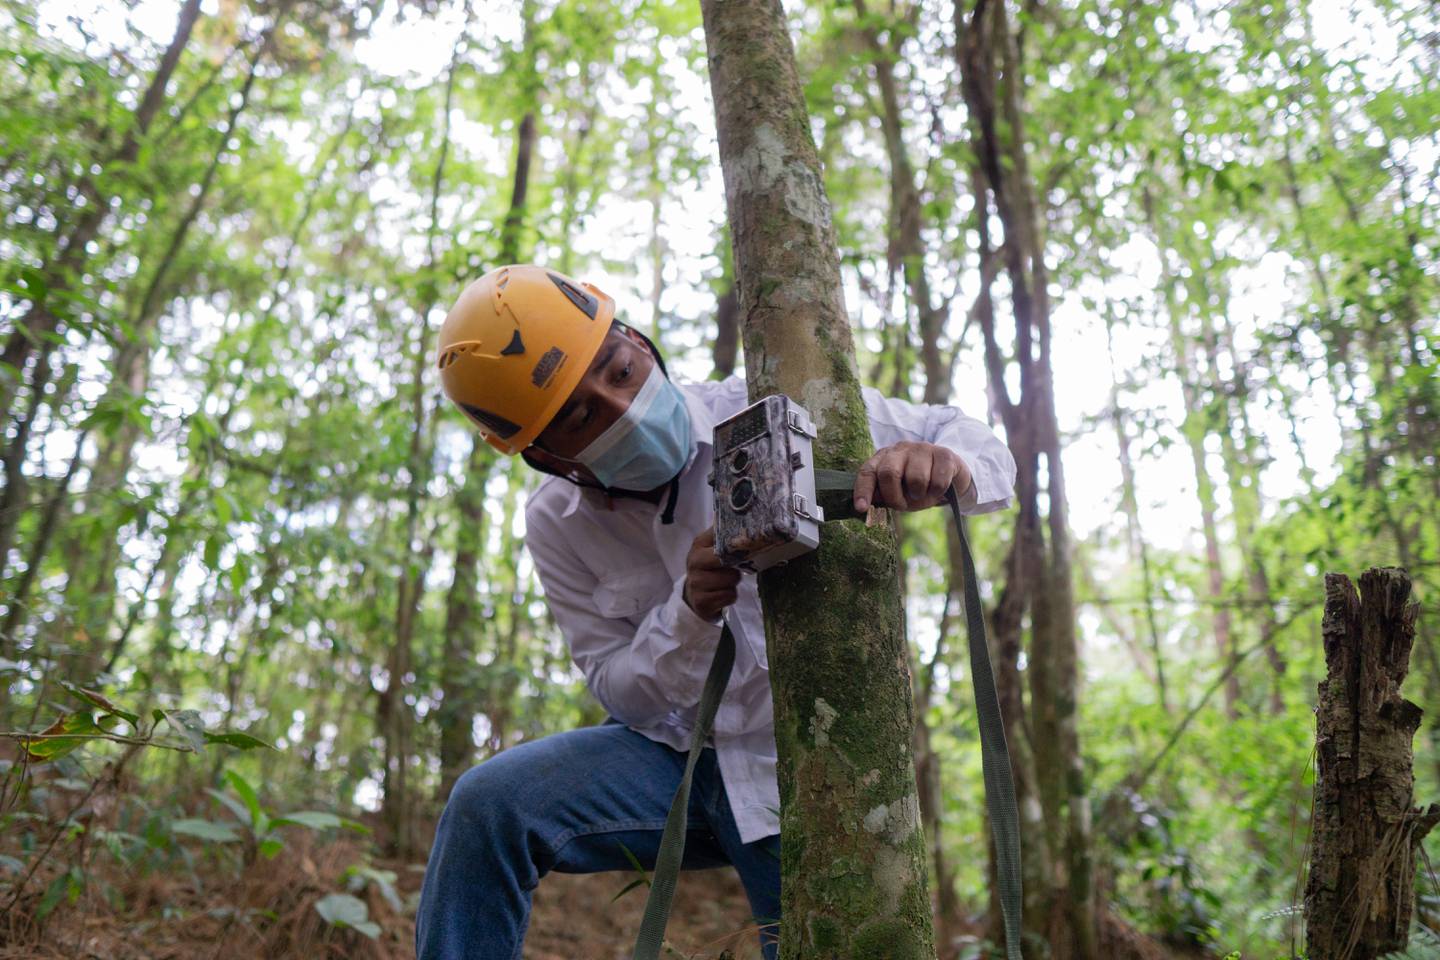 Conservation of environmental conservation in Guatemala